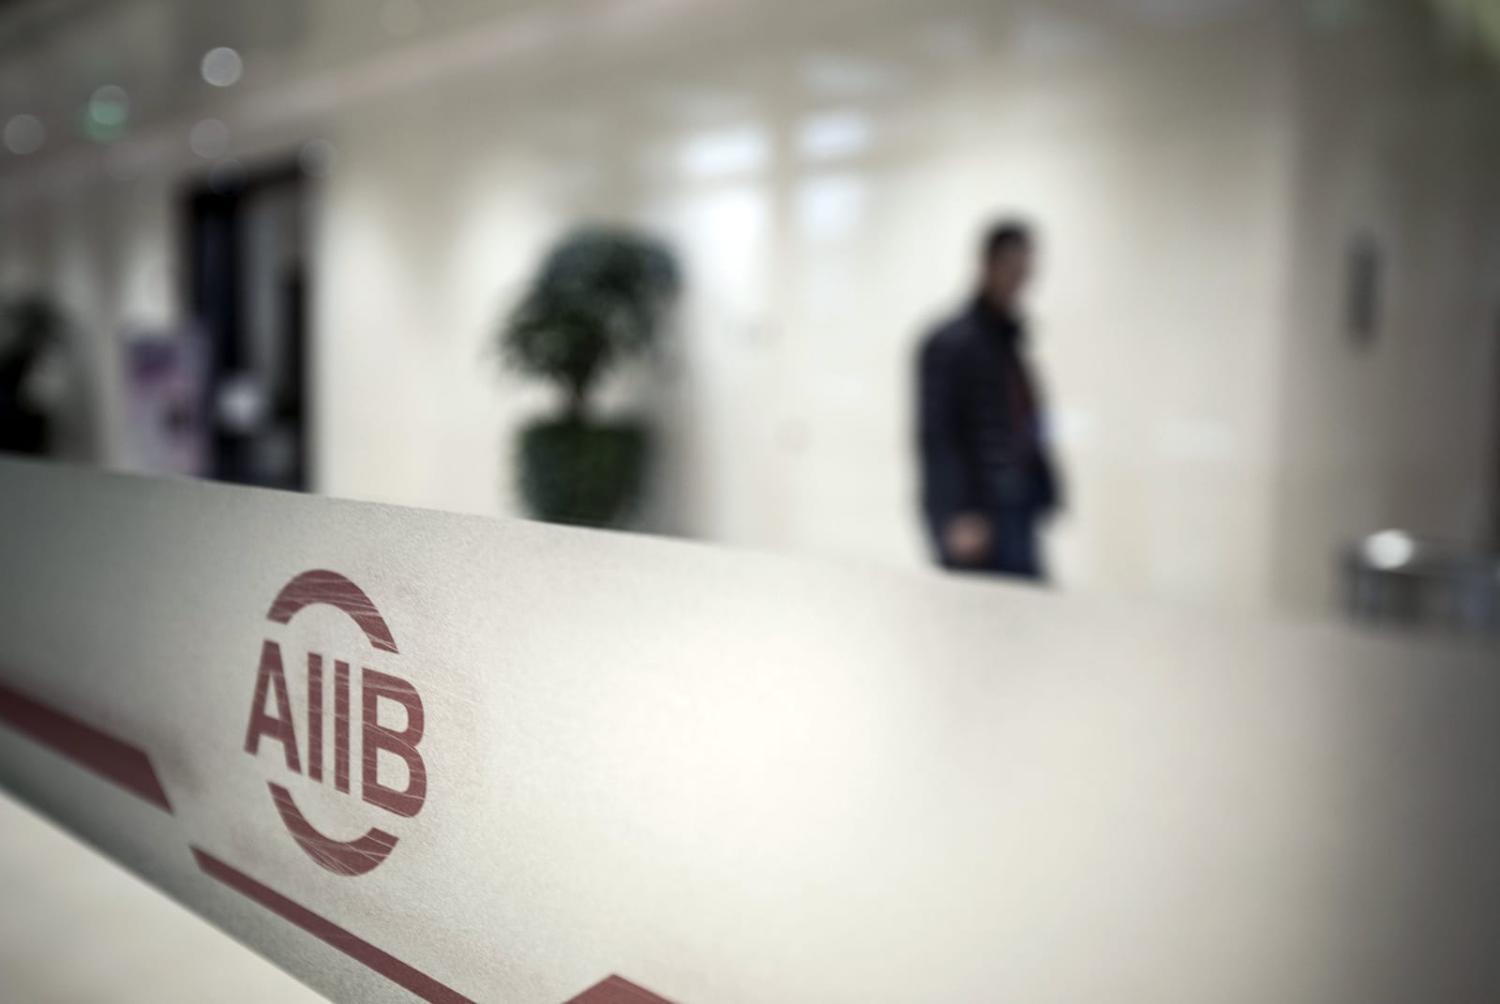 That the AIIB is located in Beijing, with a Chinese president and China holding a veto over major institutional decisions, begs the question whether the AIIB is a genuinely multilateral bank (Qilai Shen/Bloomberg via Getty Images)